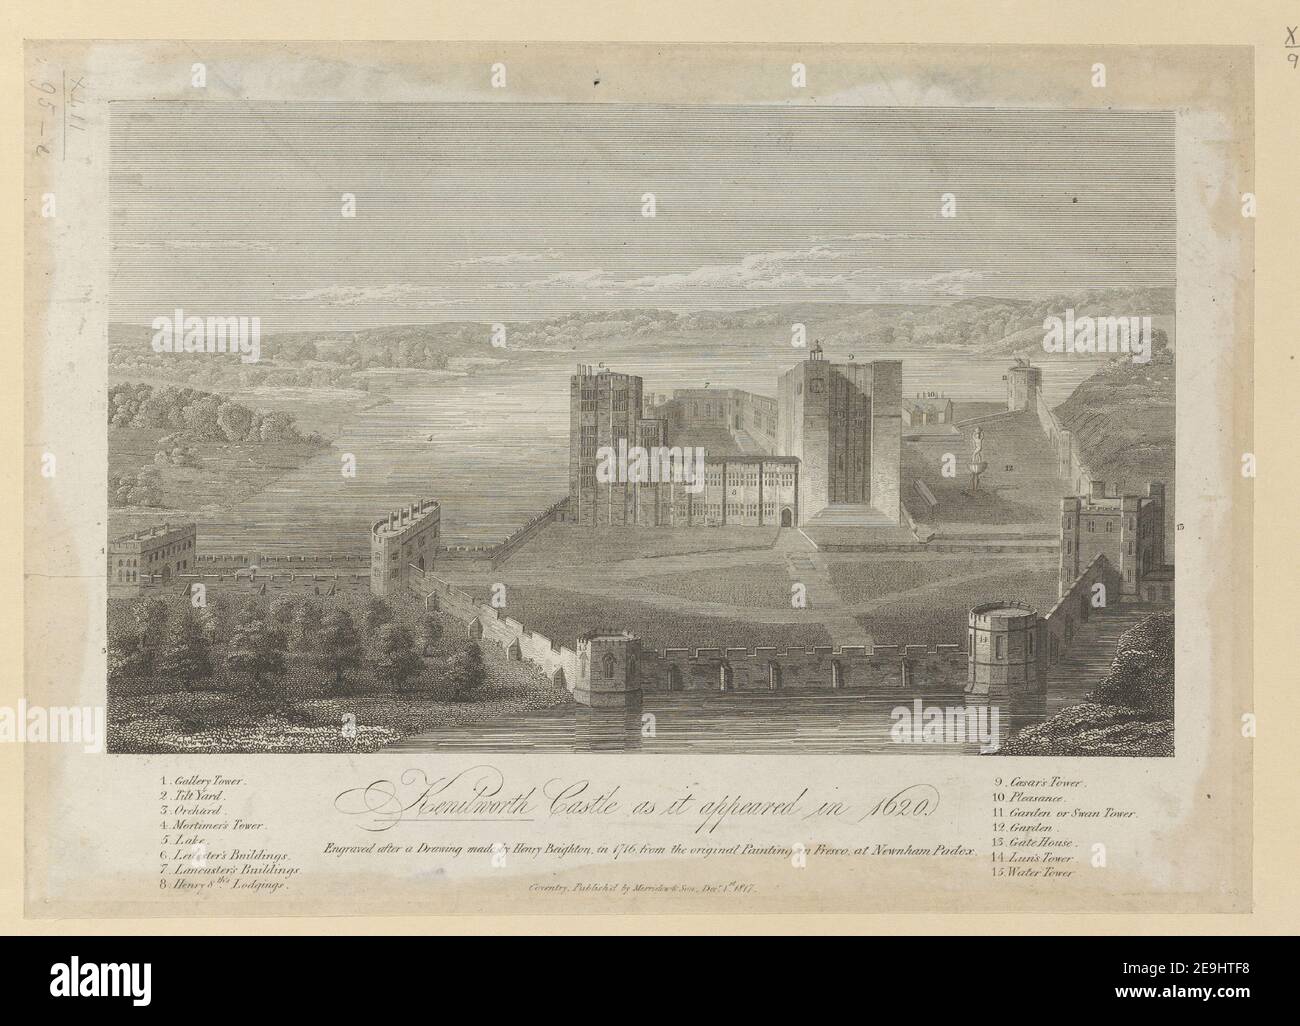 Kenilworth Castle as it appeared in 1620.  Author  Radclyffe, William 42.95.e. Place of publication: Coventry Publisher: Publish'd by Merridew , Son, Dec.r 1.st., Date of publication: 1817.  Item type: 1 print Medium: etching and engraving Dimensions: sheet 22.5 x 31.6 cm  Former owner: George III, King of Great Britain, 1738-1820 Stock Photo